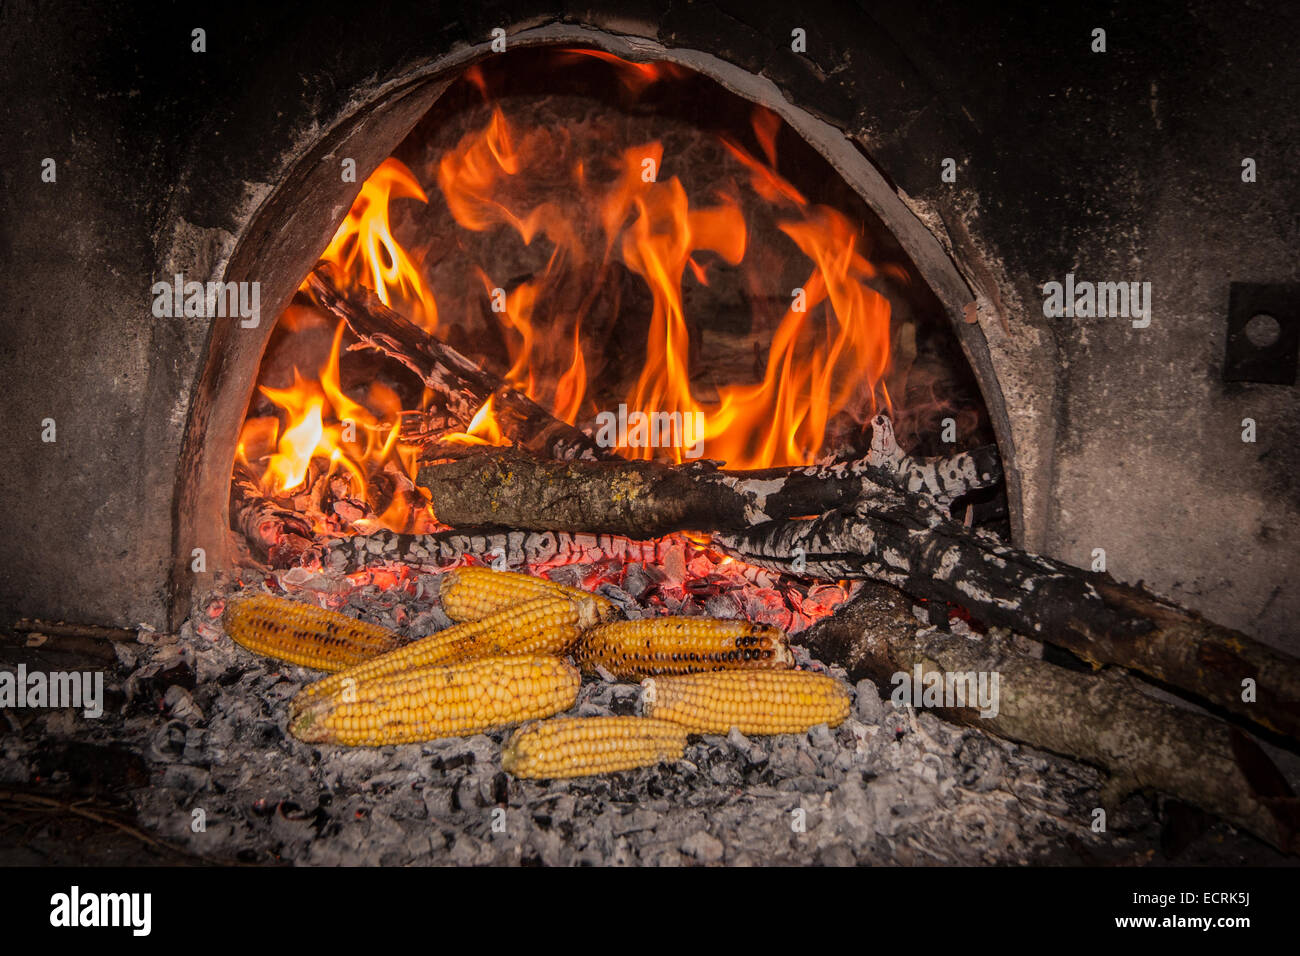 Crilled corn in a traditional wood oven. Pournaria village, Arcadia, Peloponnese, Greece Stock Photo